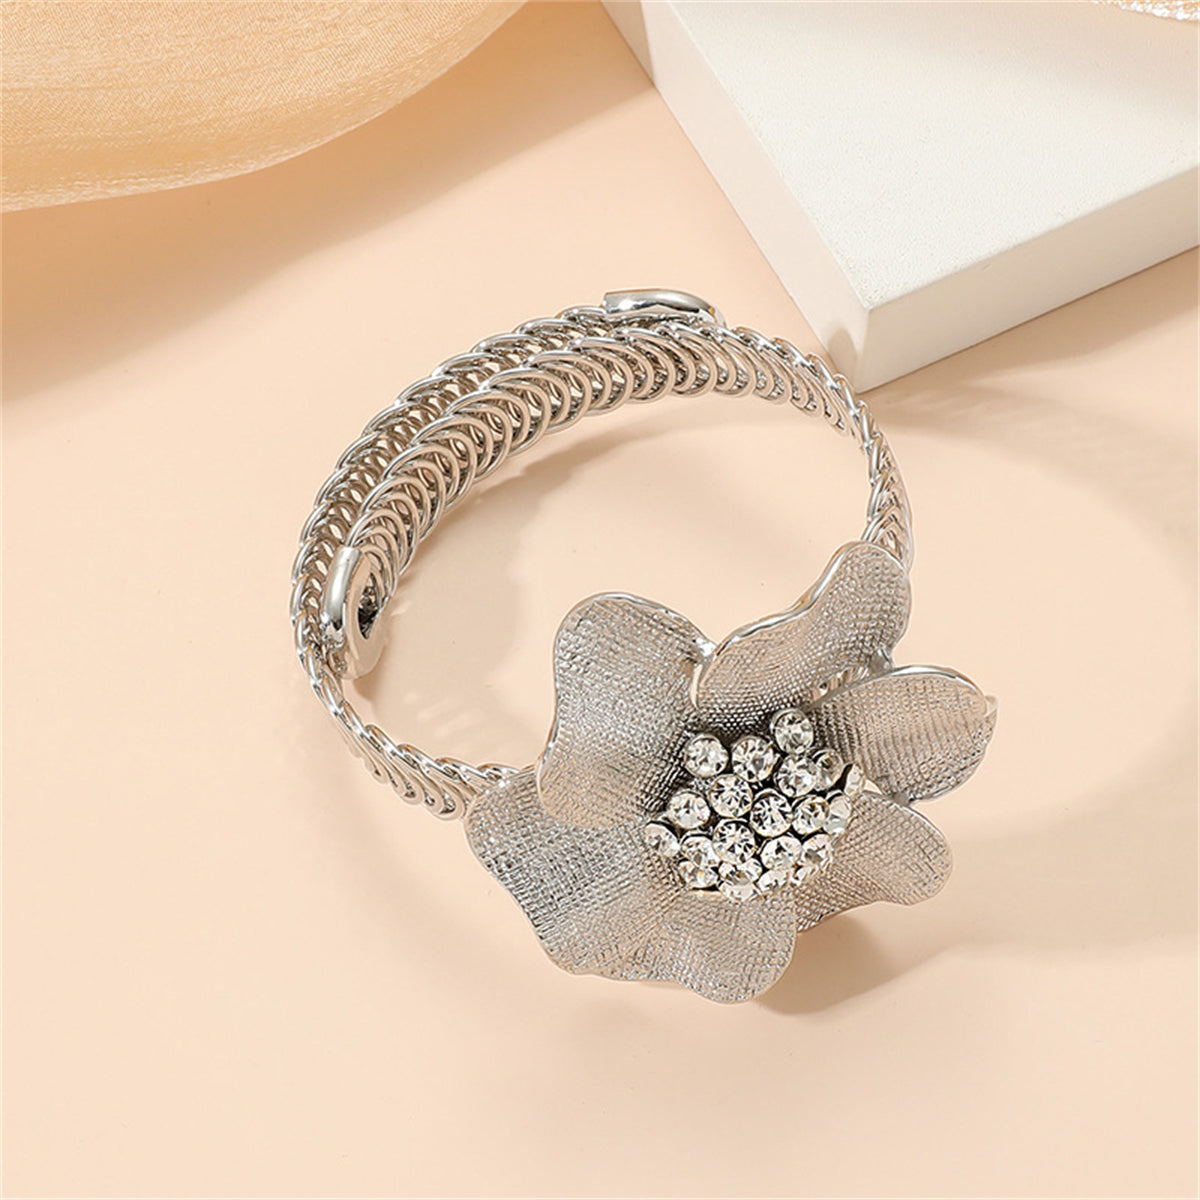 Cubic Zirconia & Silver-Plated Flower Adjustable Bangle